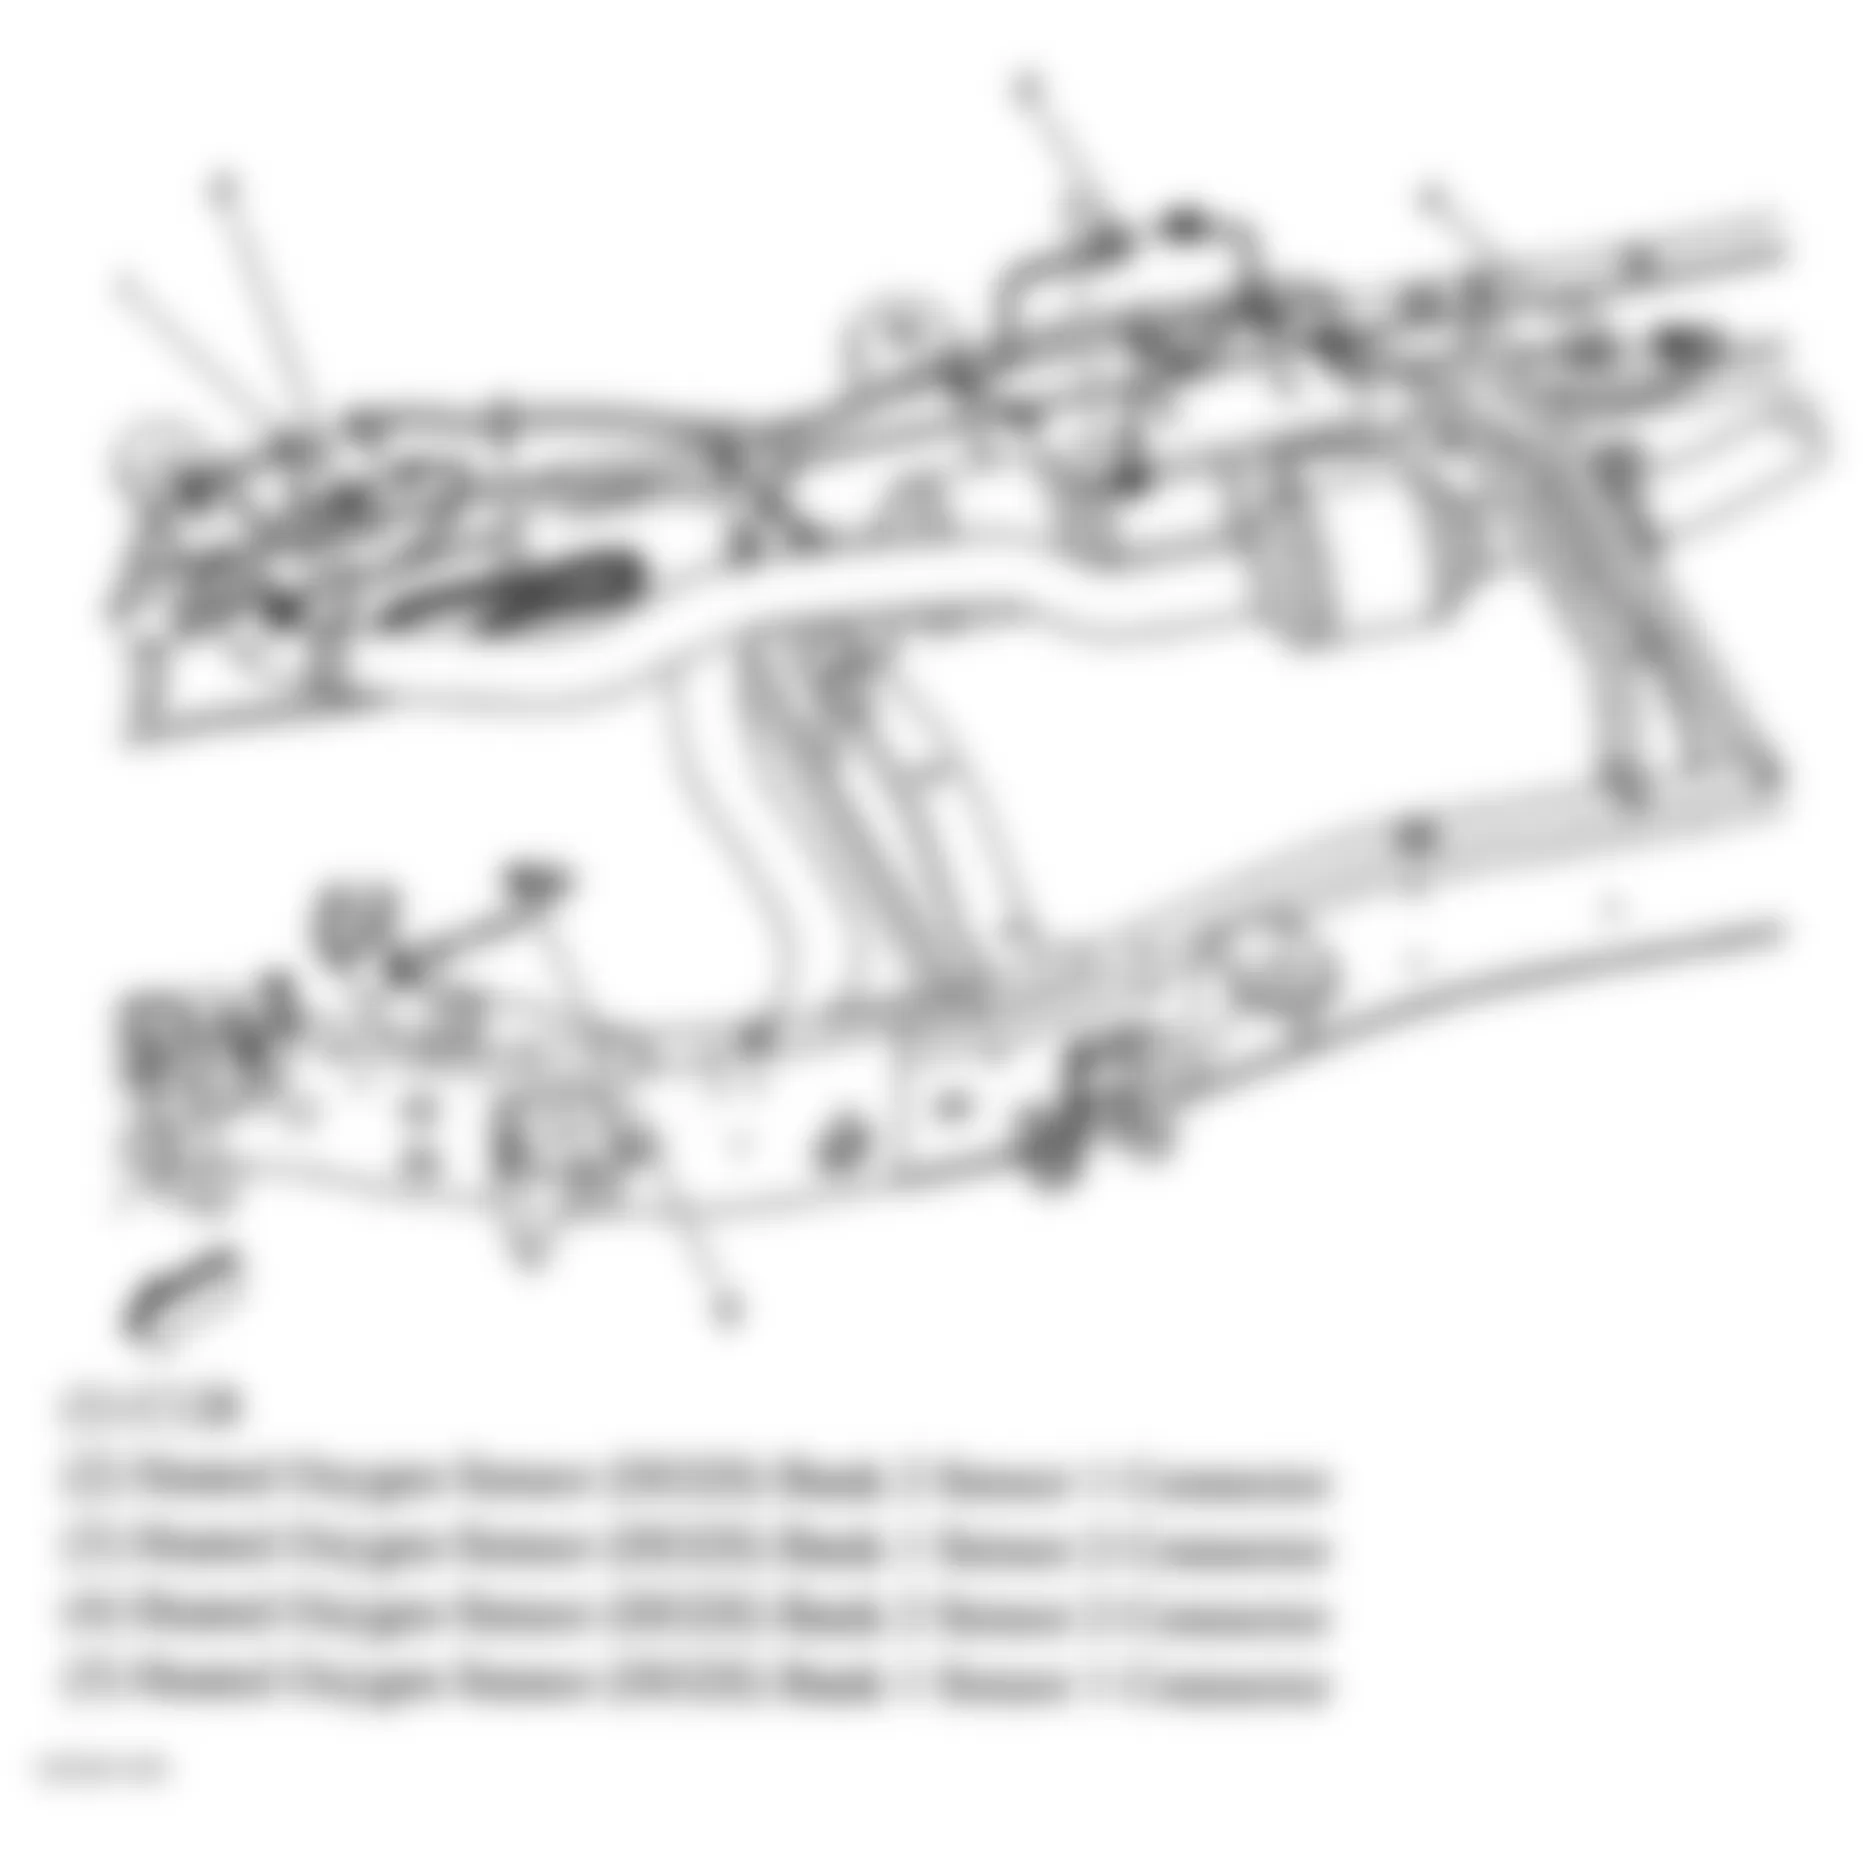 GMC Savana G3500 2005 - Component Locations -  Center Of Chassis